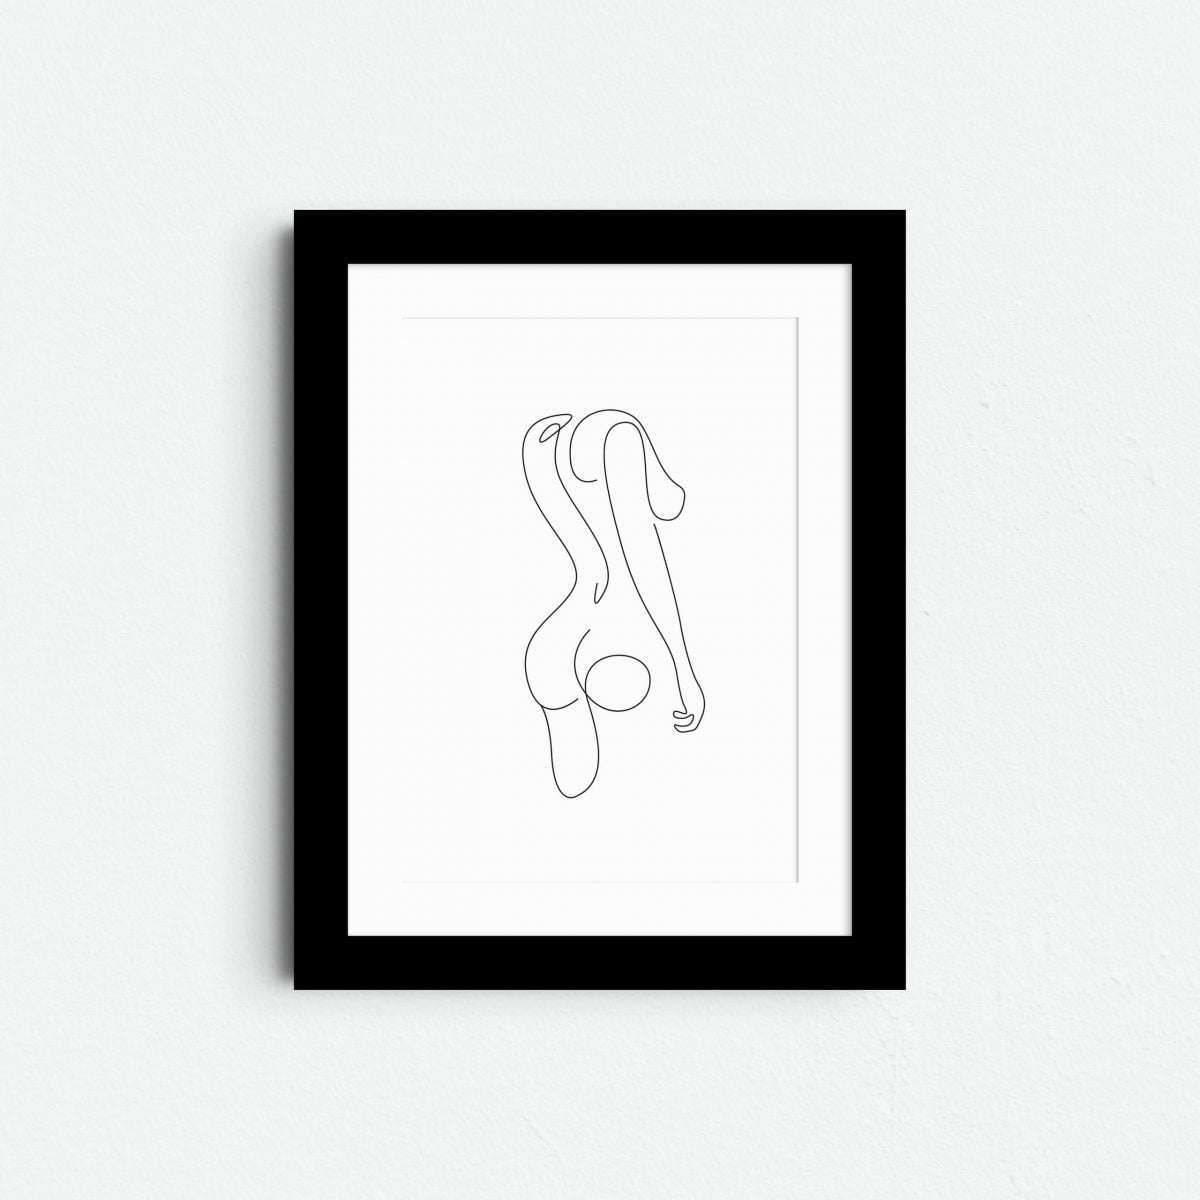 the-view-nude-erotic-wall-art-prints-framed-portrait